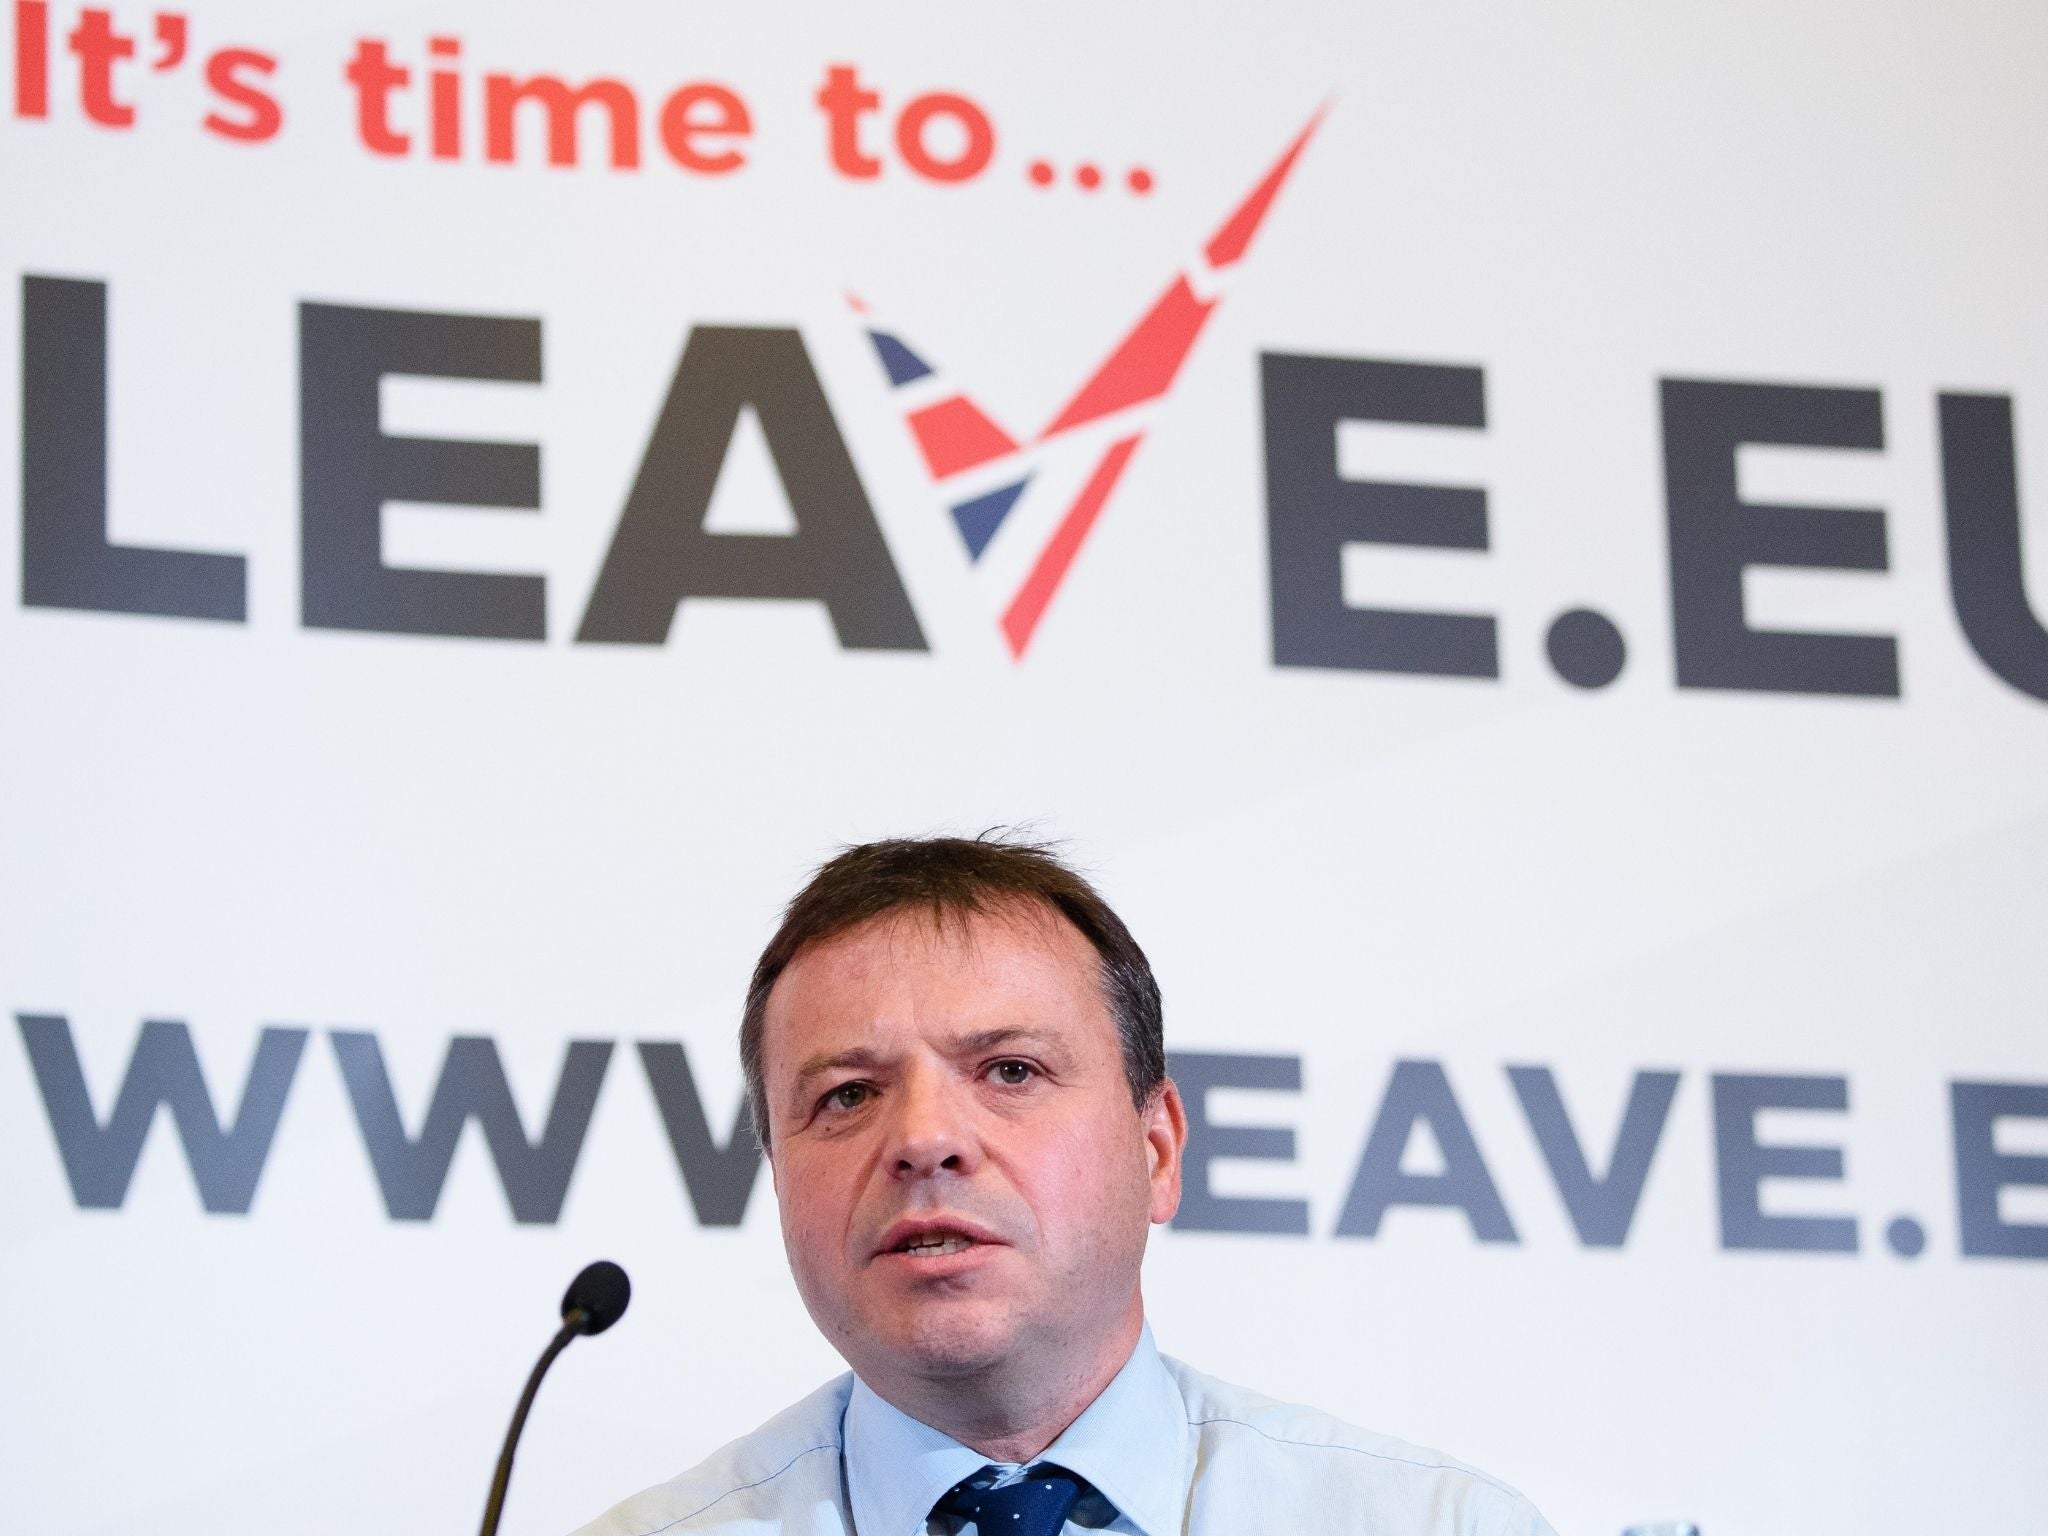 Arron Banks founded the campaign group Leave.EU